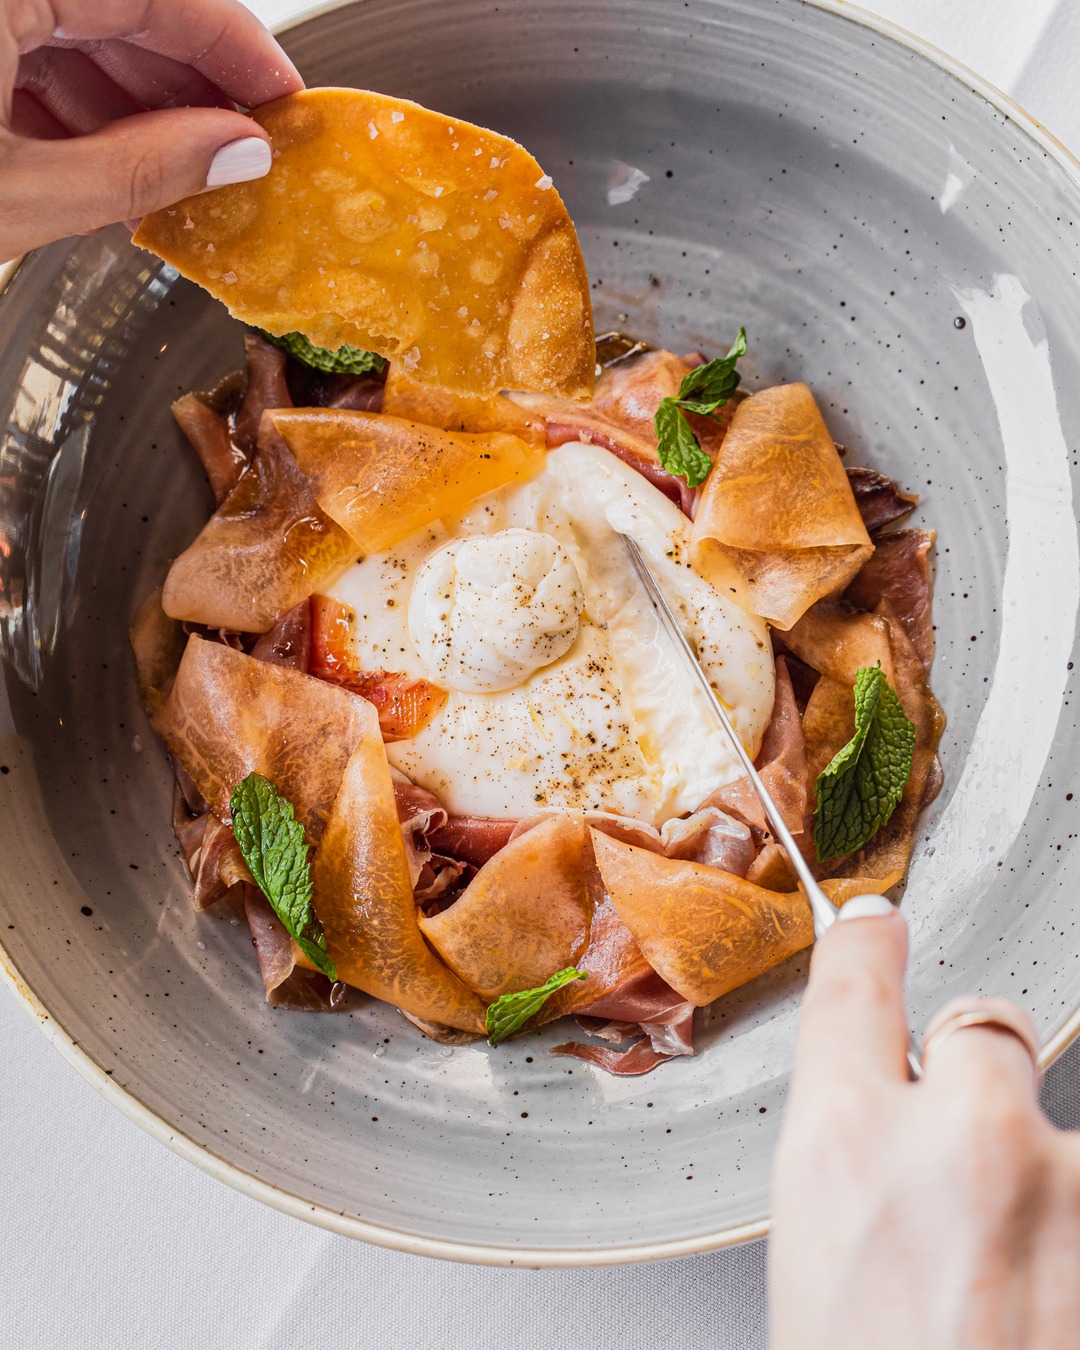 a plate of burrata and crisp bread at otto, one of brisbane's best restaurants